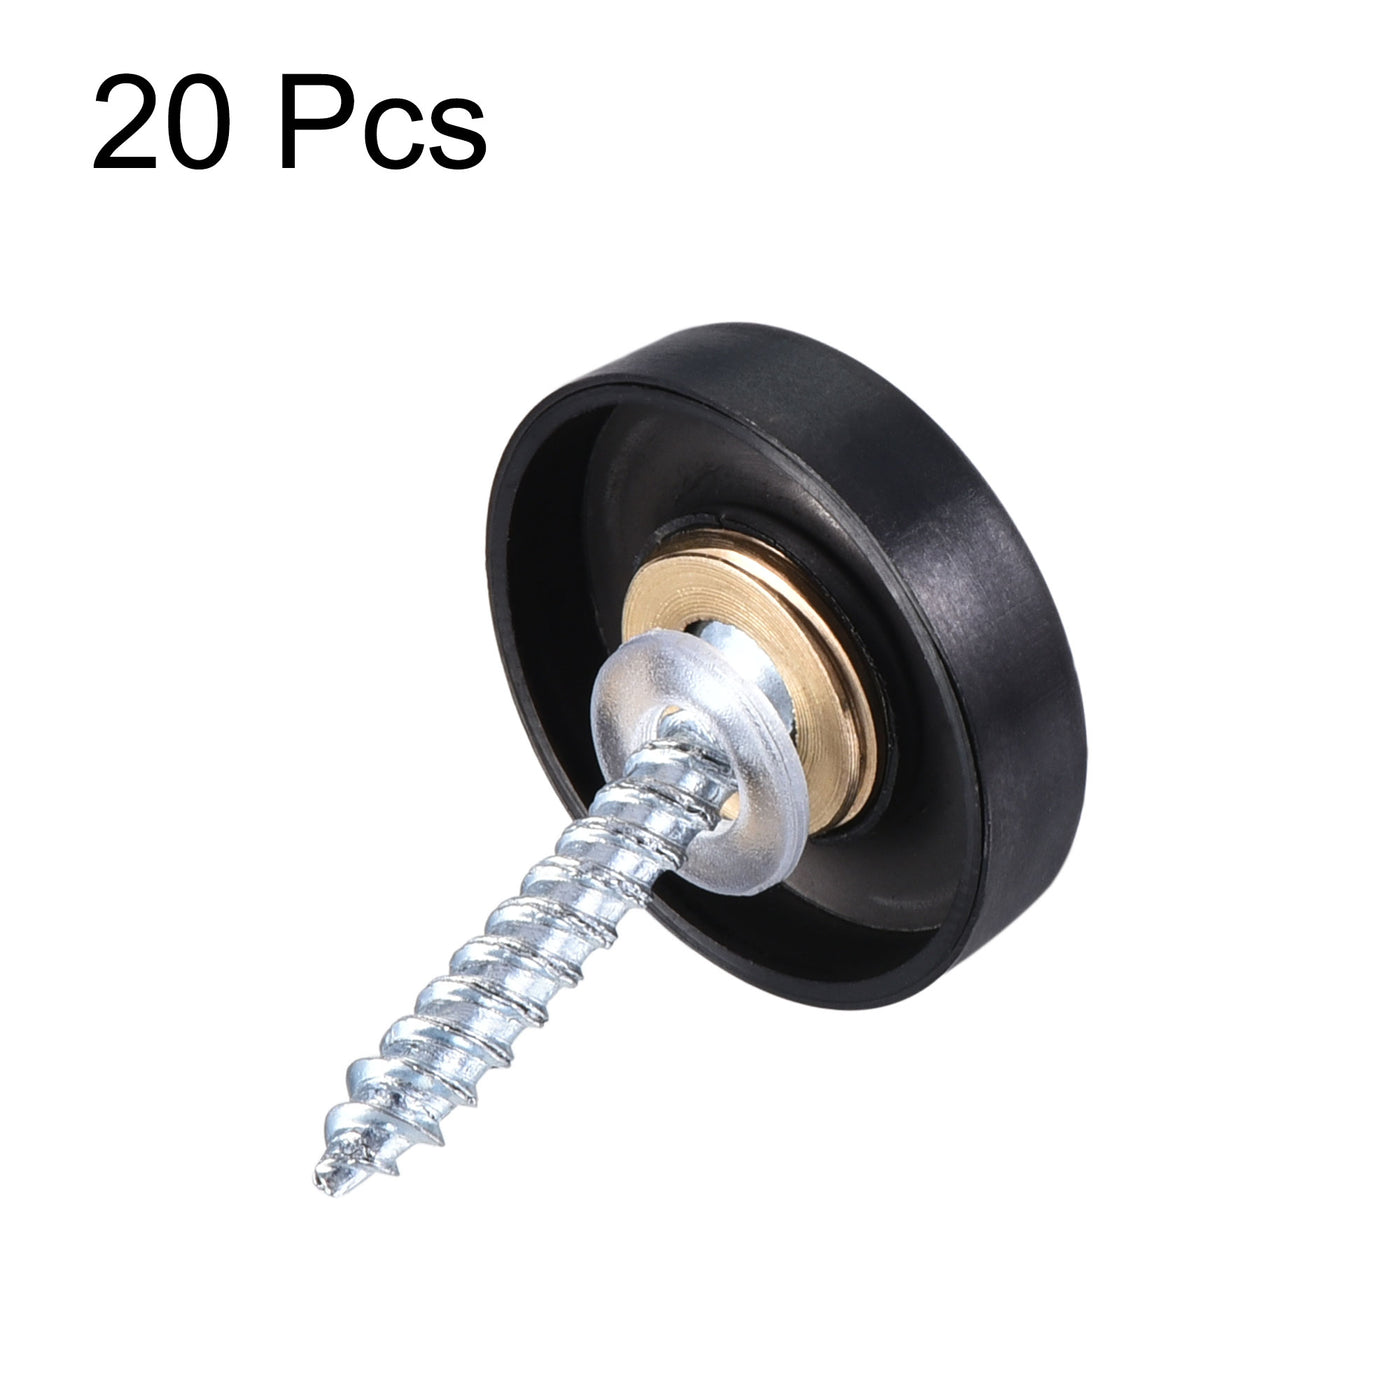 Uxcell Uxcell Mirror Screws, 25mm/0.98", 20pcs Decorative Cap Fasteners Cover Nails, Wire Drawing, Black 304 Stainless Steel